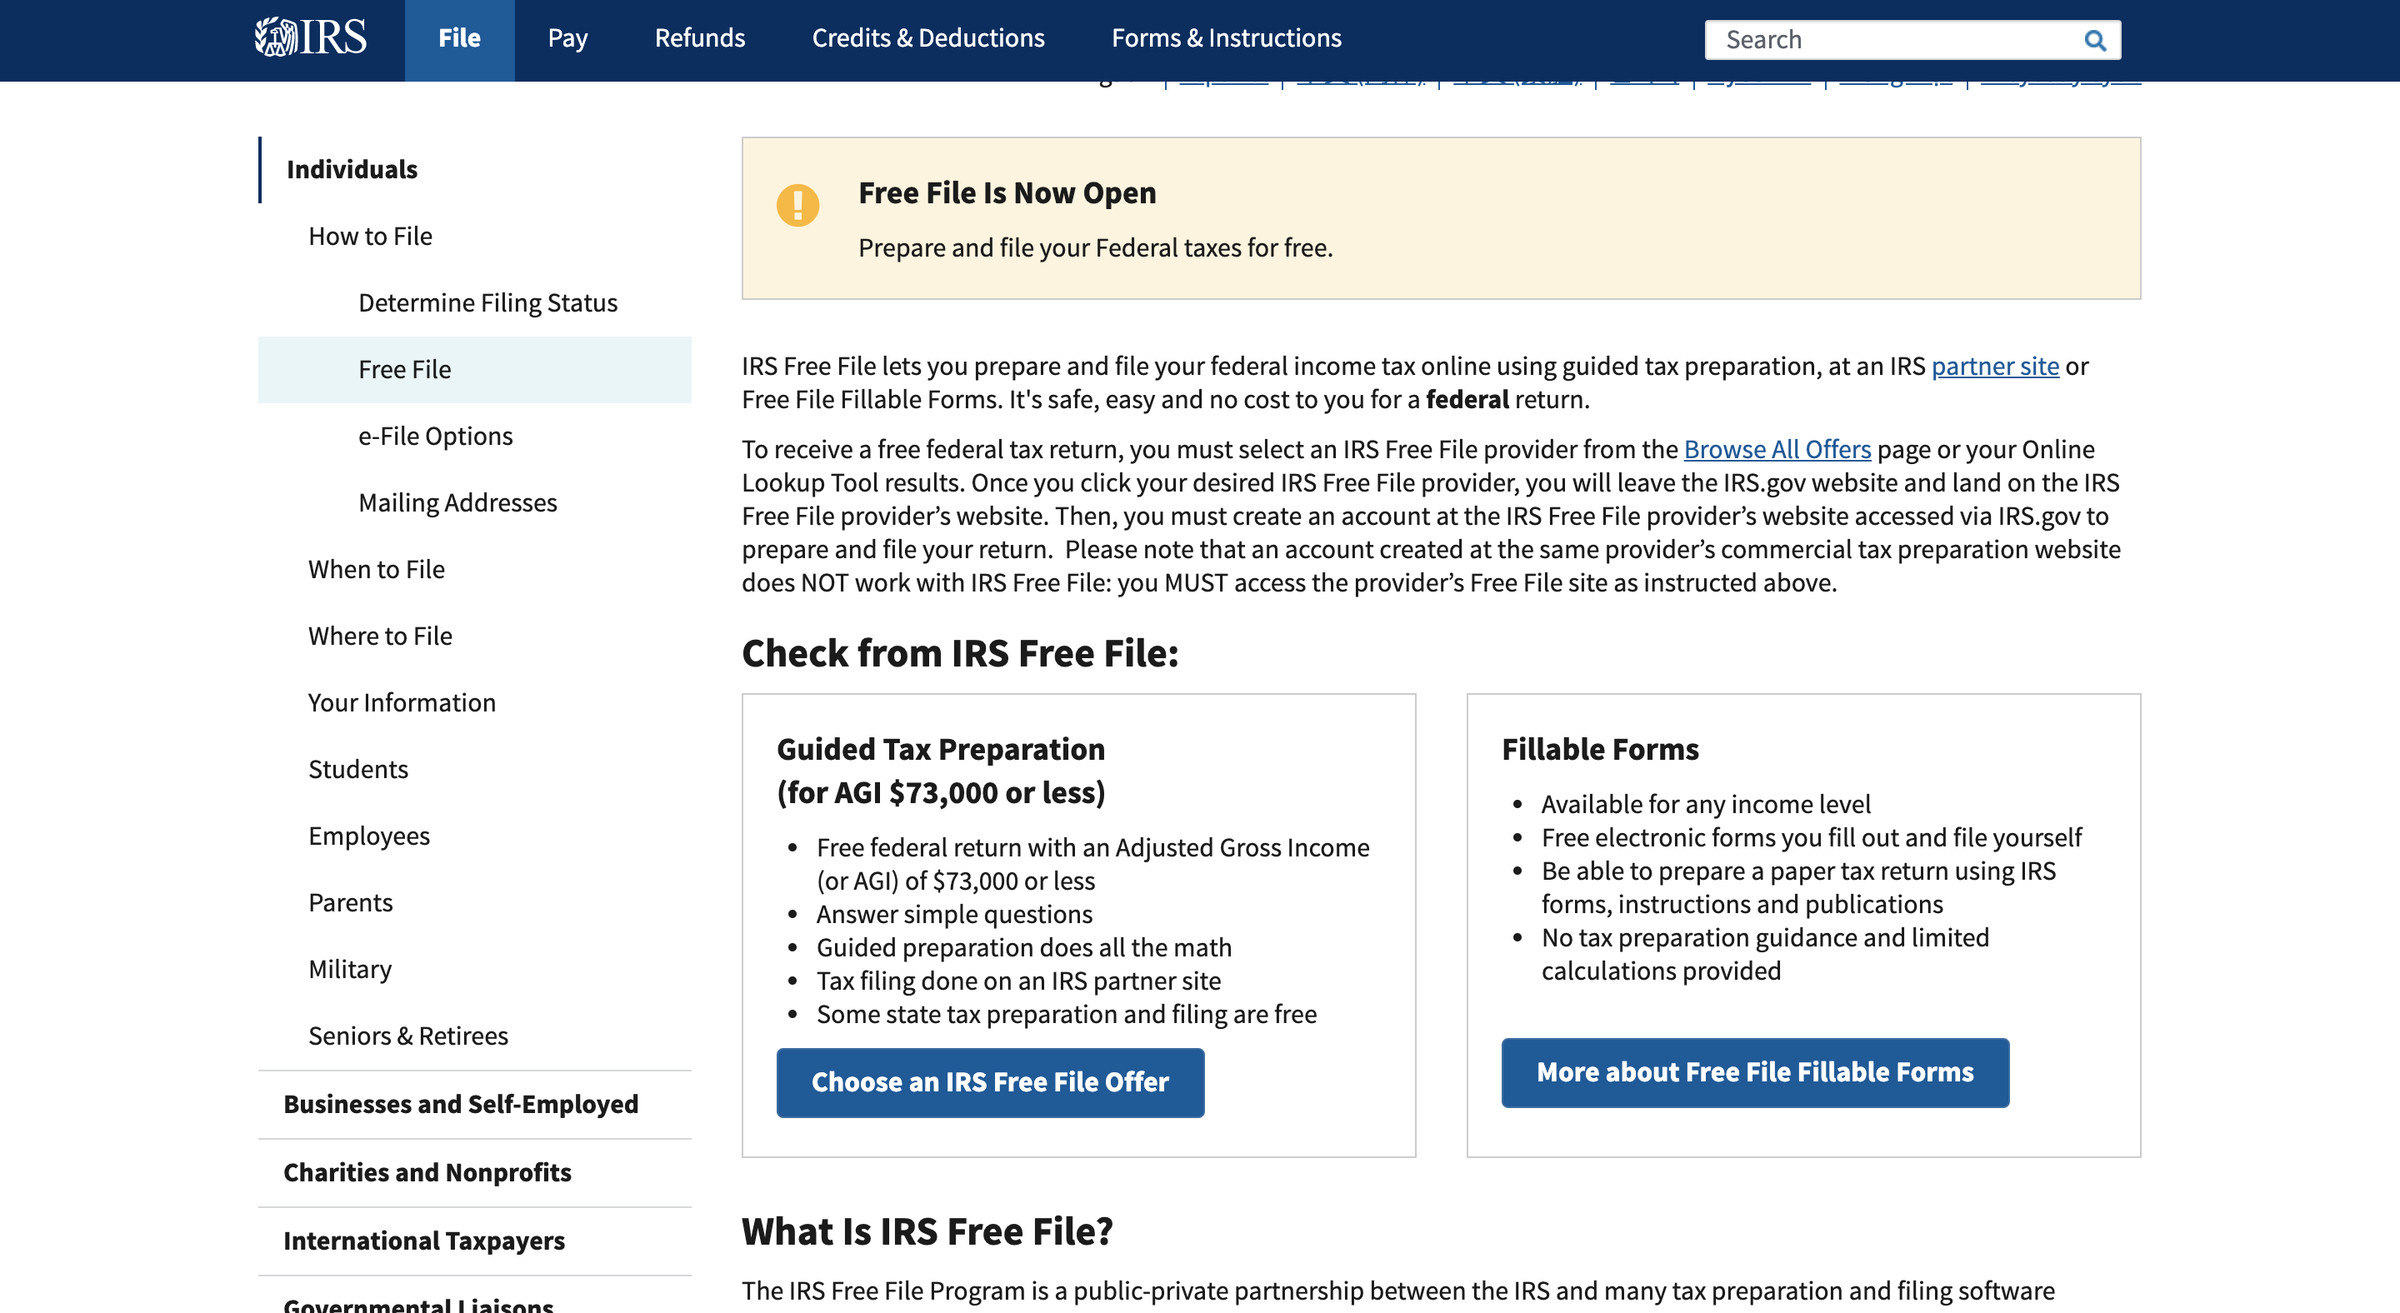 Free File is available for those whose income is $73,000 or less.